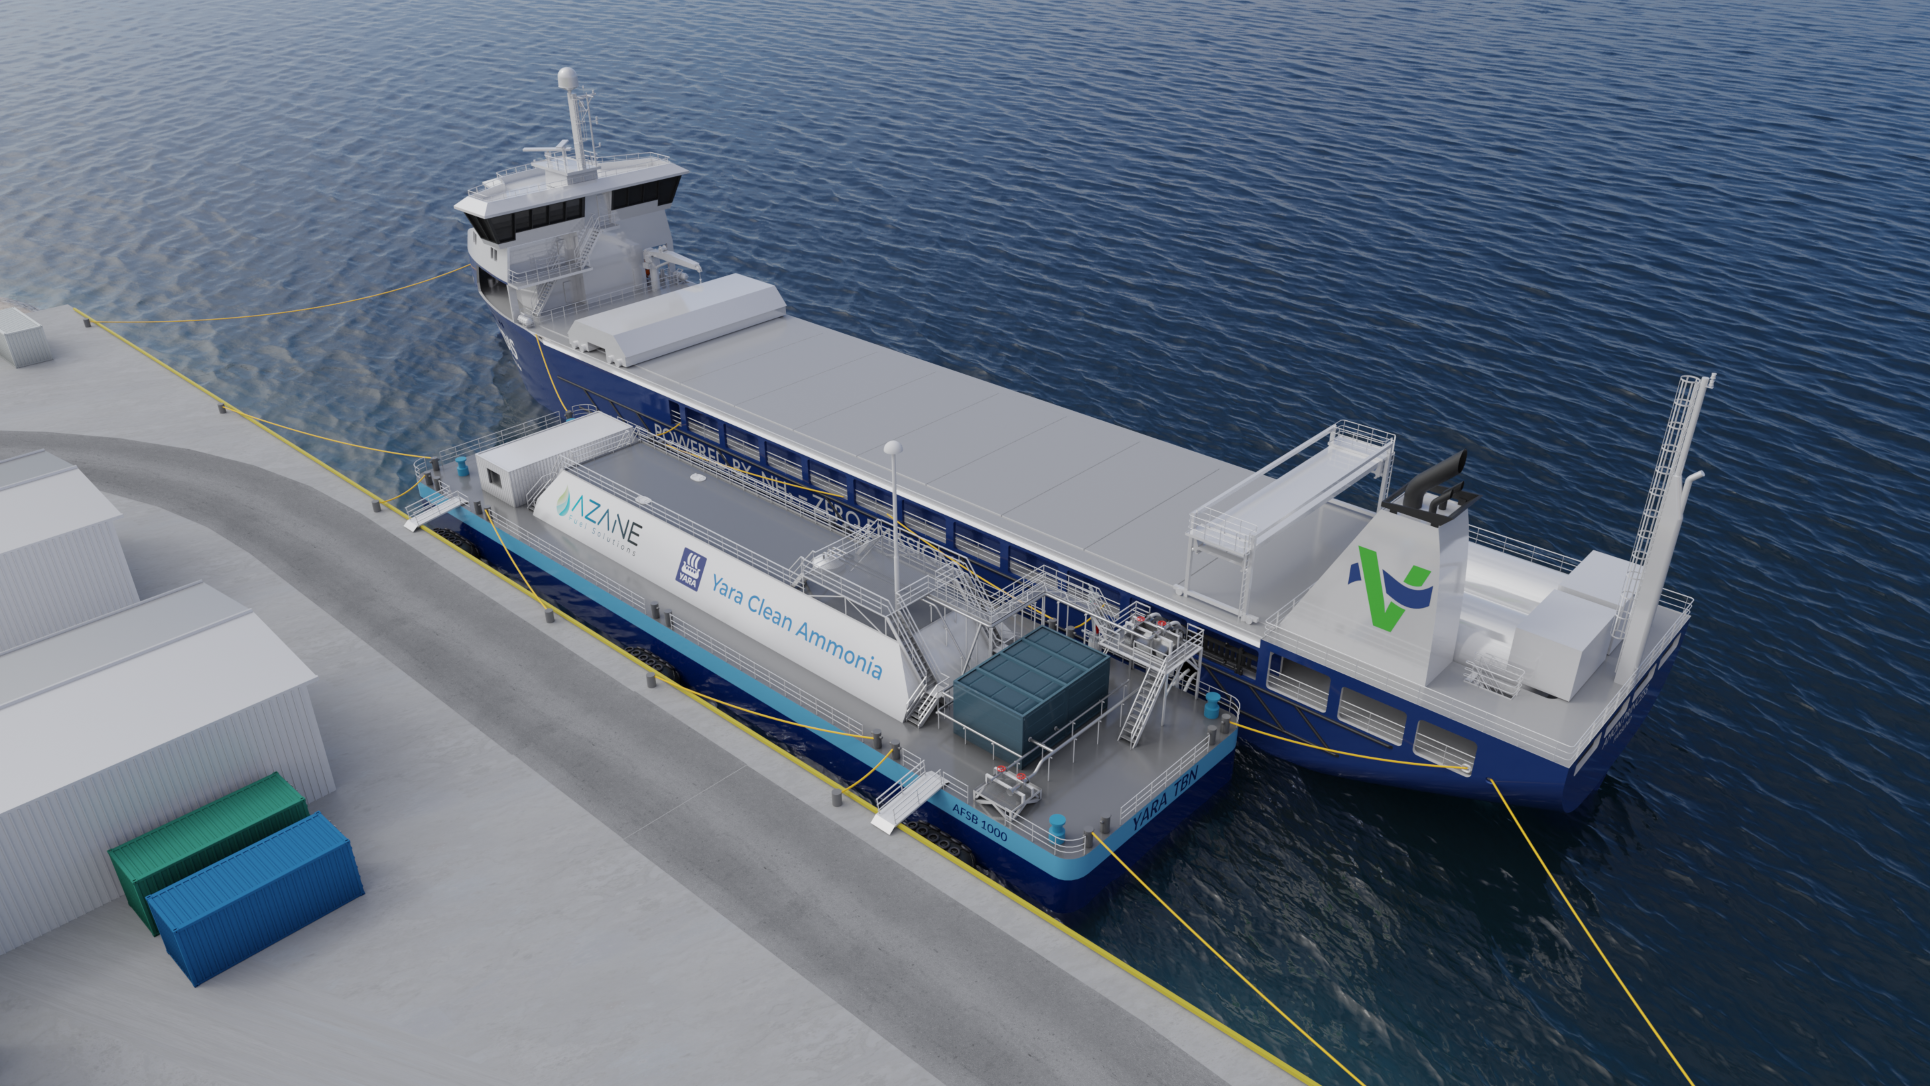 Yara International Pre-Orders 15 Ammonia Bunkering Barges from AZANE Fuel Solutions to Launch World's First Carbon-Free Bunkering Network 